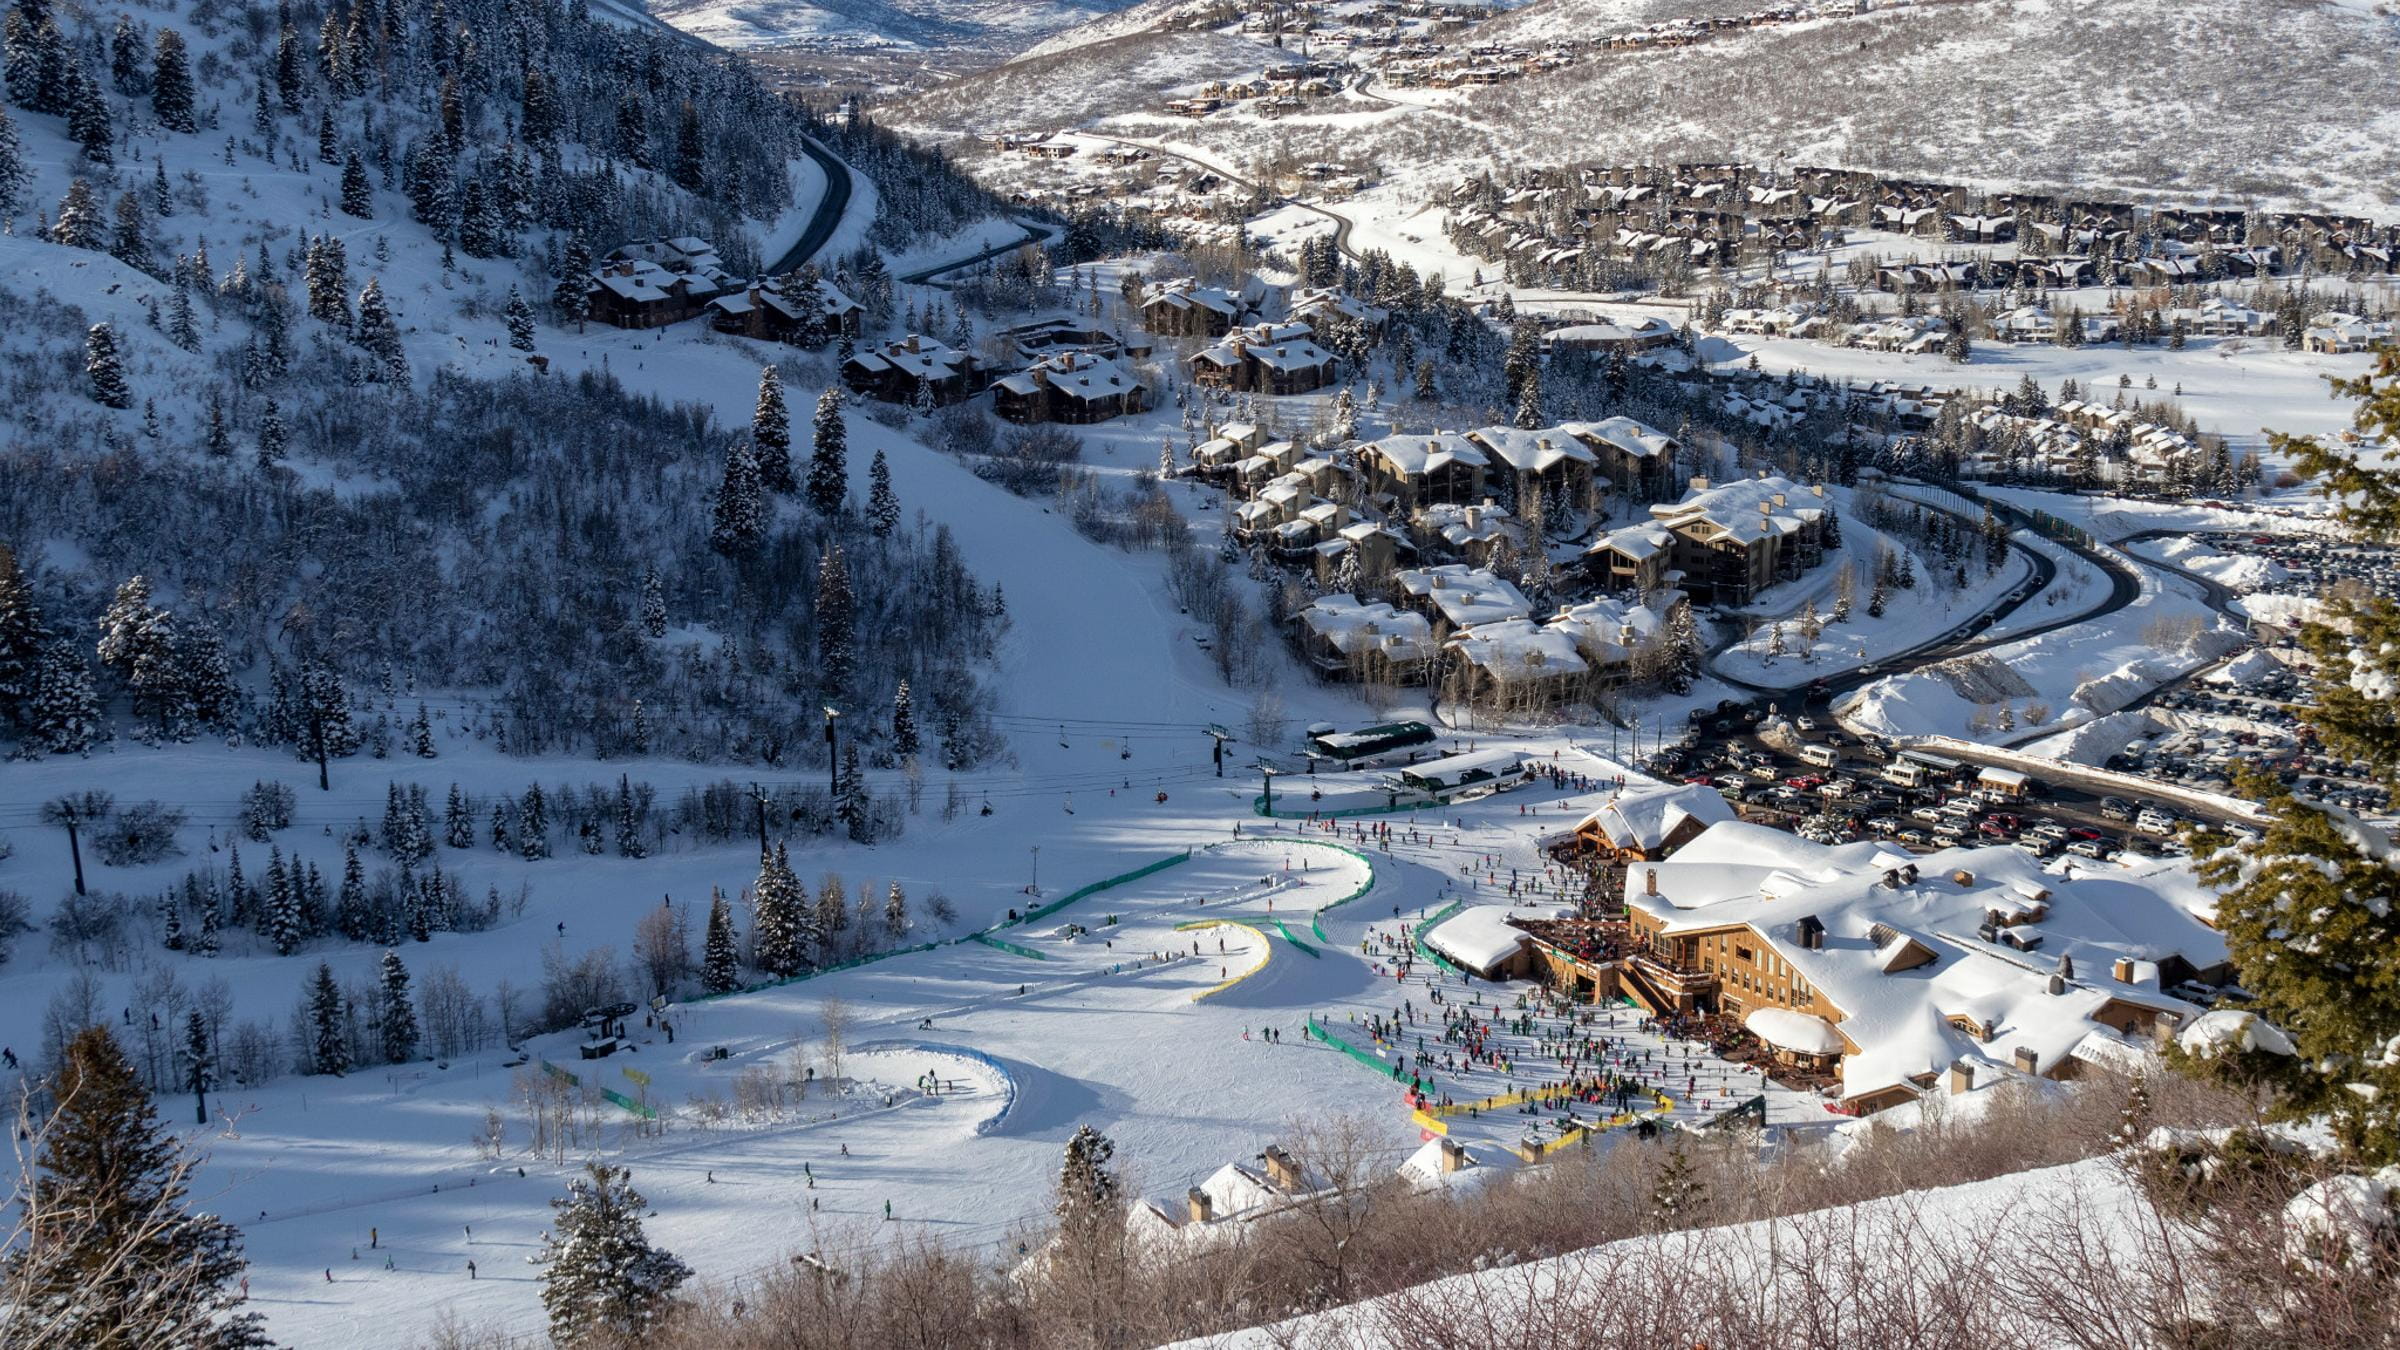 Aerial view of Snow Park Lodge and base